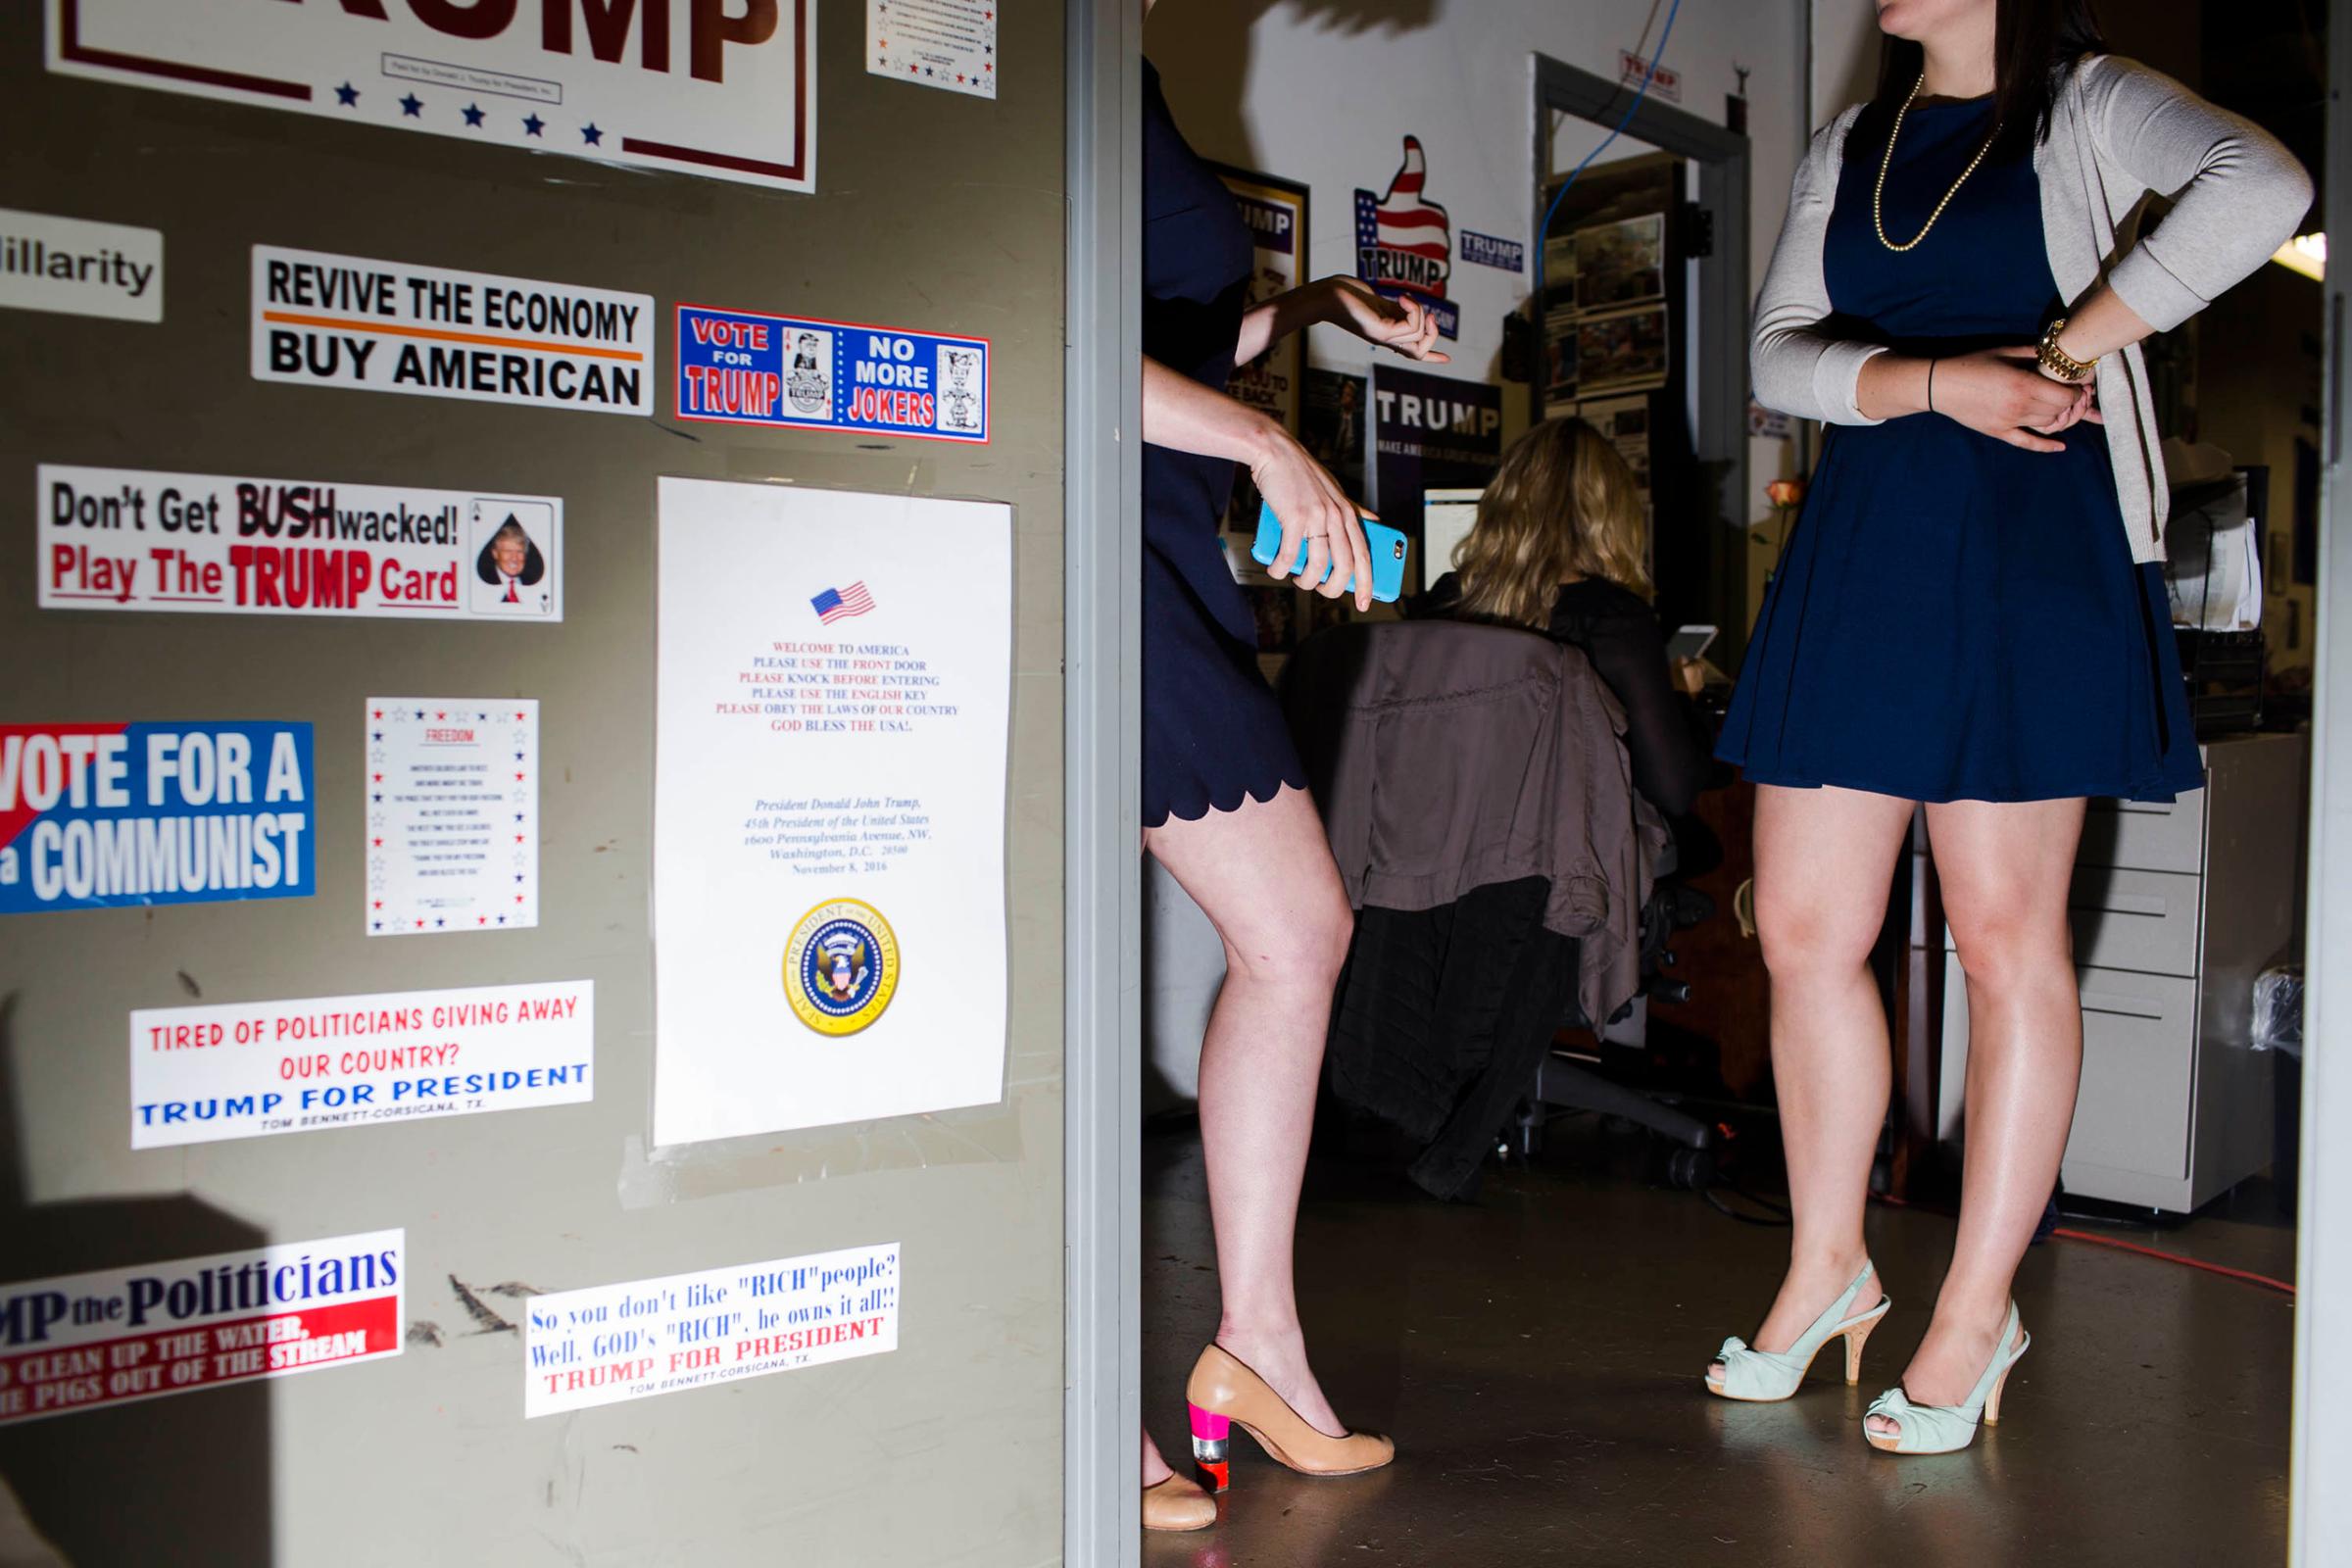 NEW YORK - MAY 24: Scenes from Inside the campaign headquarters of Donald Trump on May 24, 2016, in Trump Tower in New York City. (Photo by Landon Nordeman)